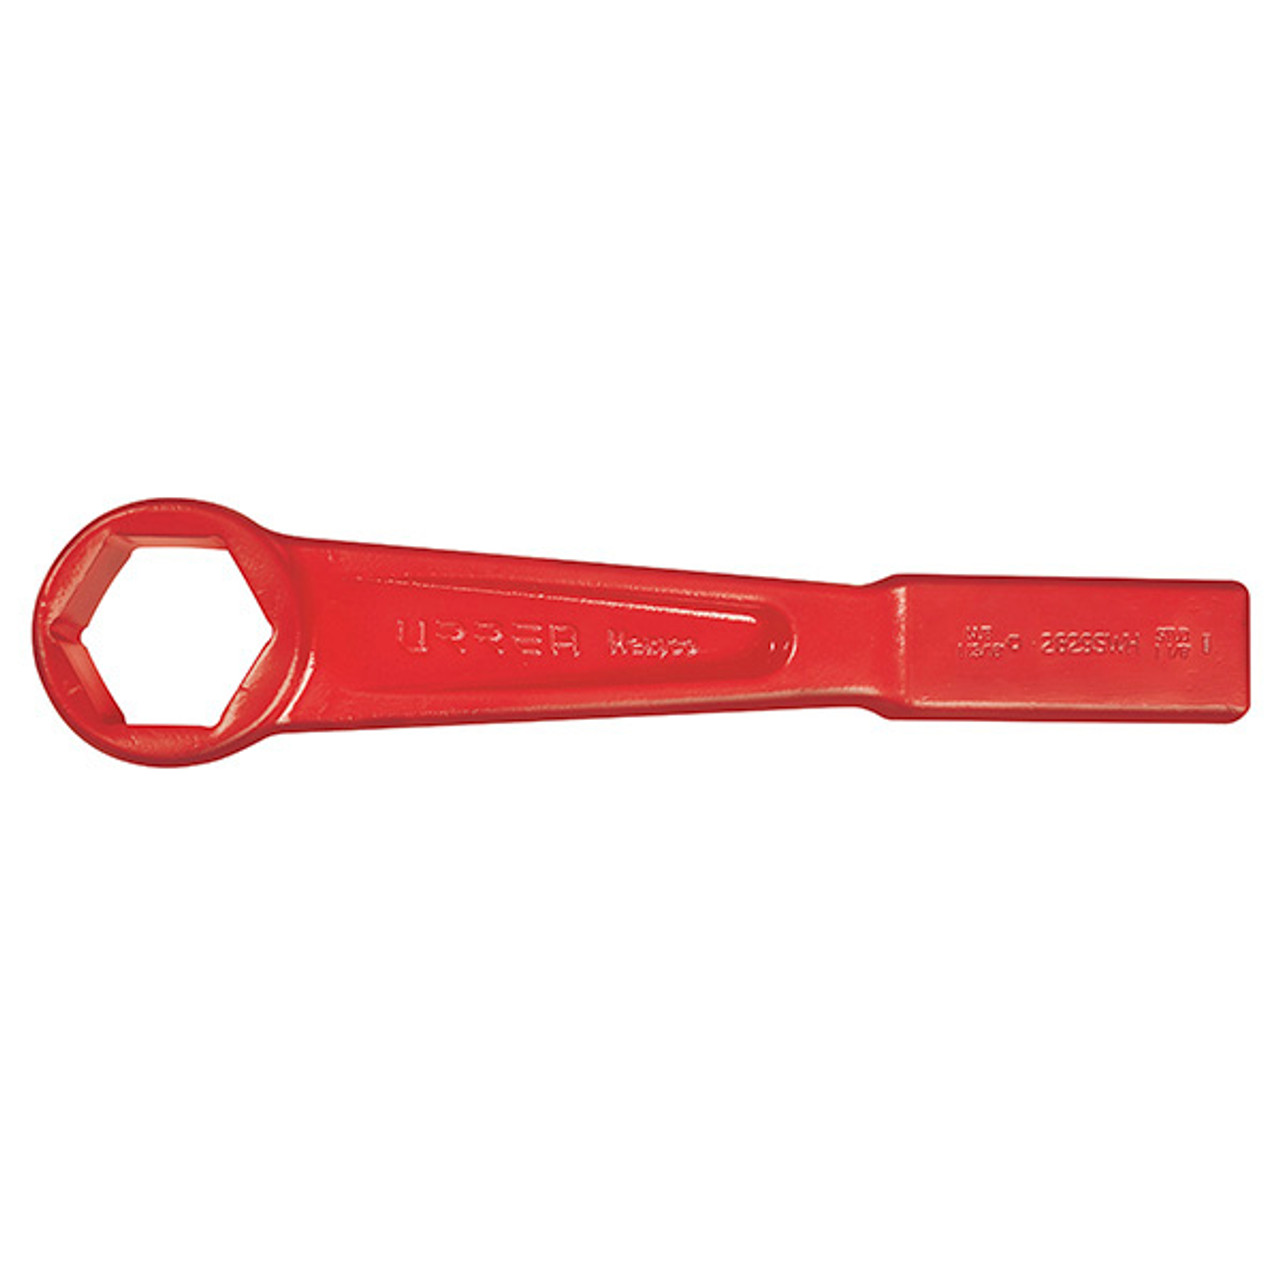 URREA 6-Point Thin Wall Striking Wrench - 1-5/8? Flat Strike Wrench with Straight Pattern Design & Low Clearance Head - 2826SWH